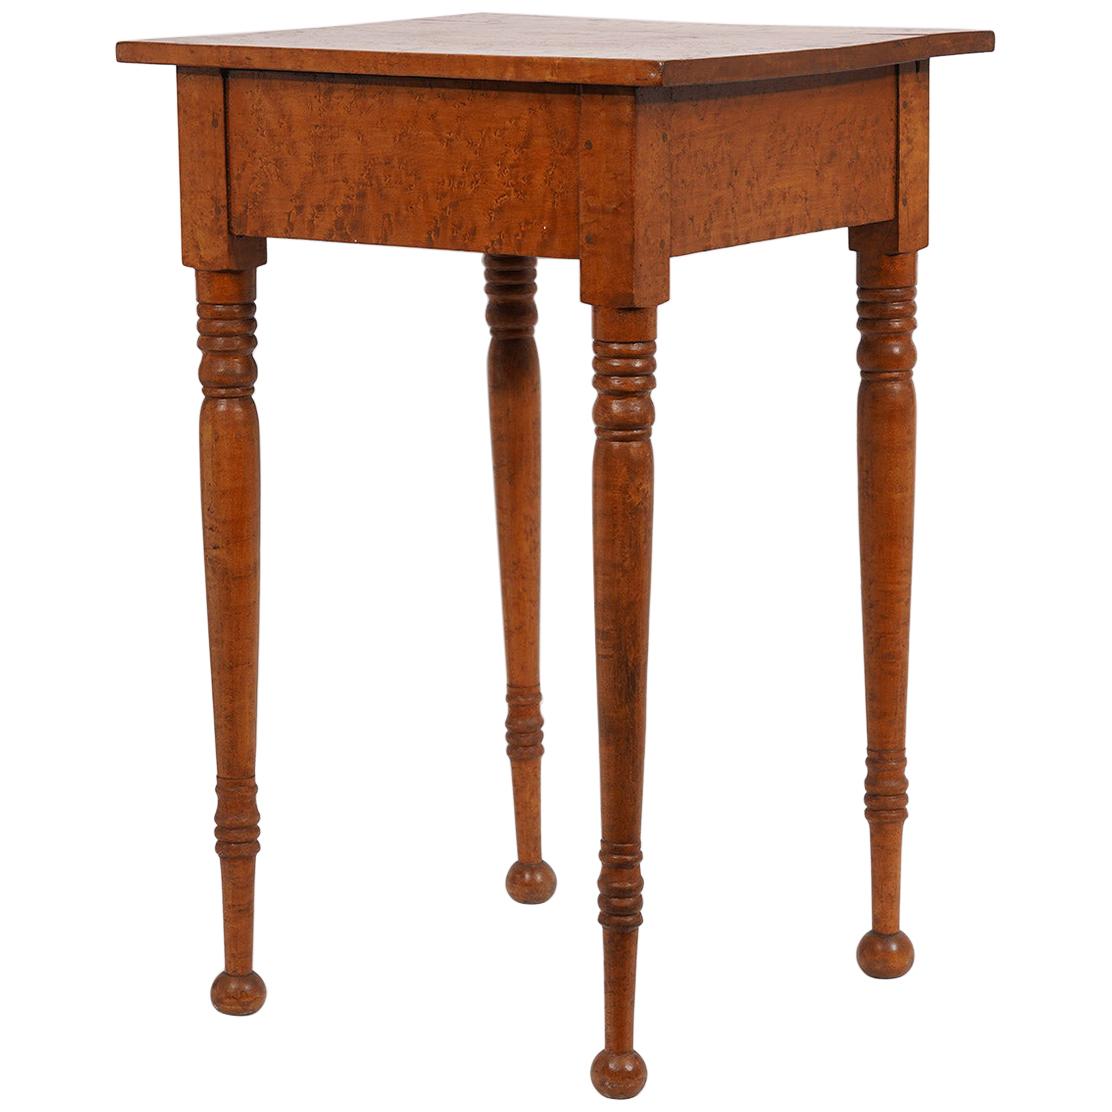 American Federal Birdseye Maple Work Table with Turned Legs and Ball Feet